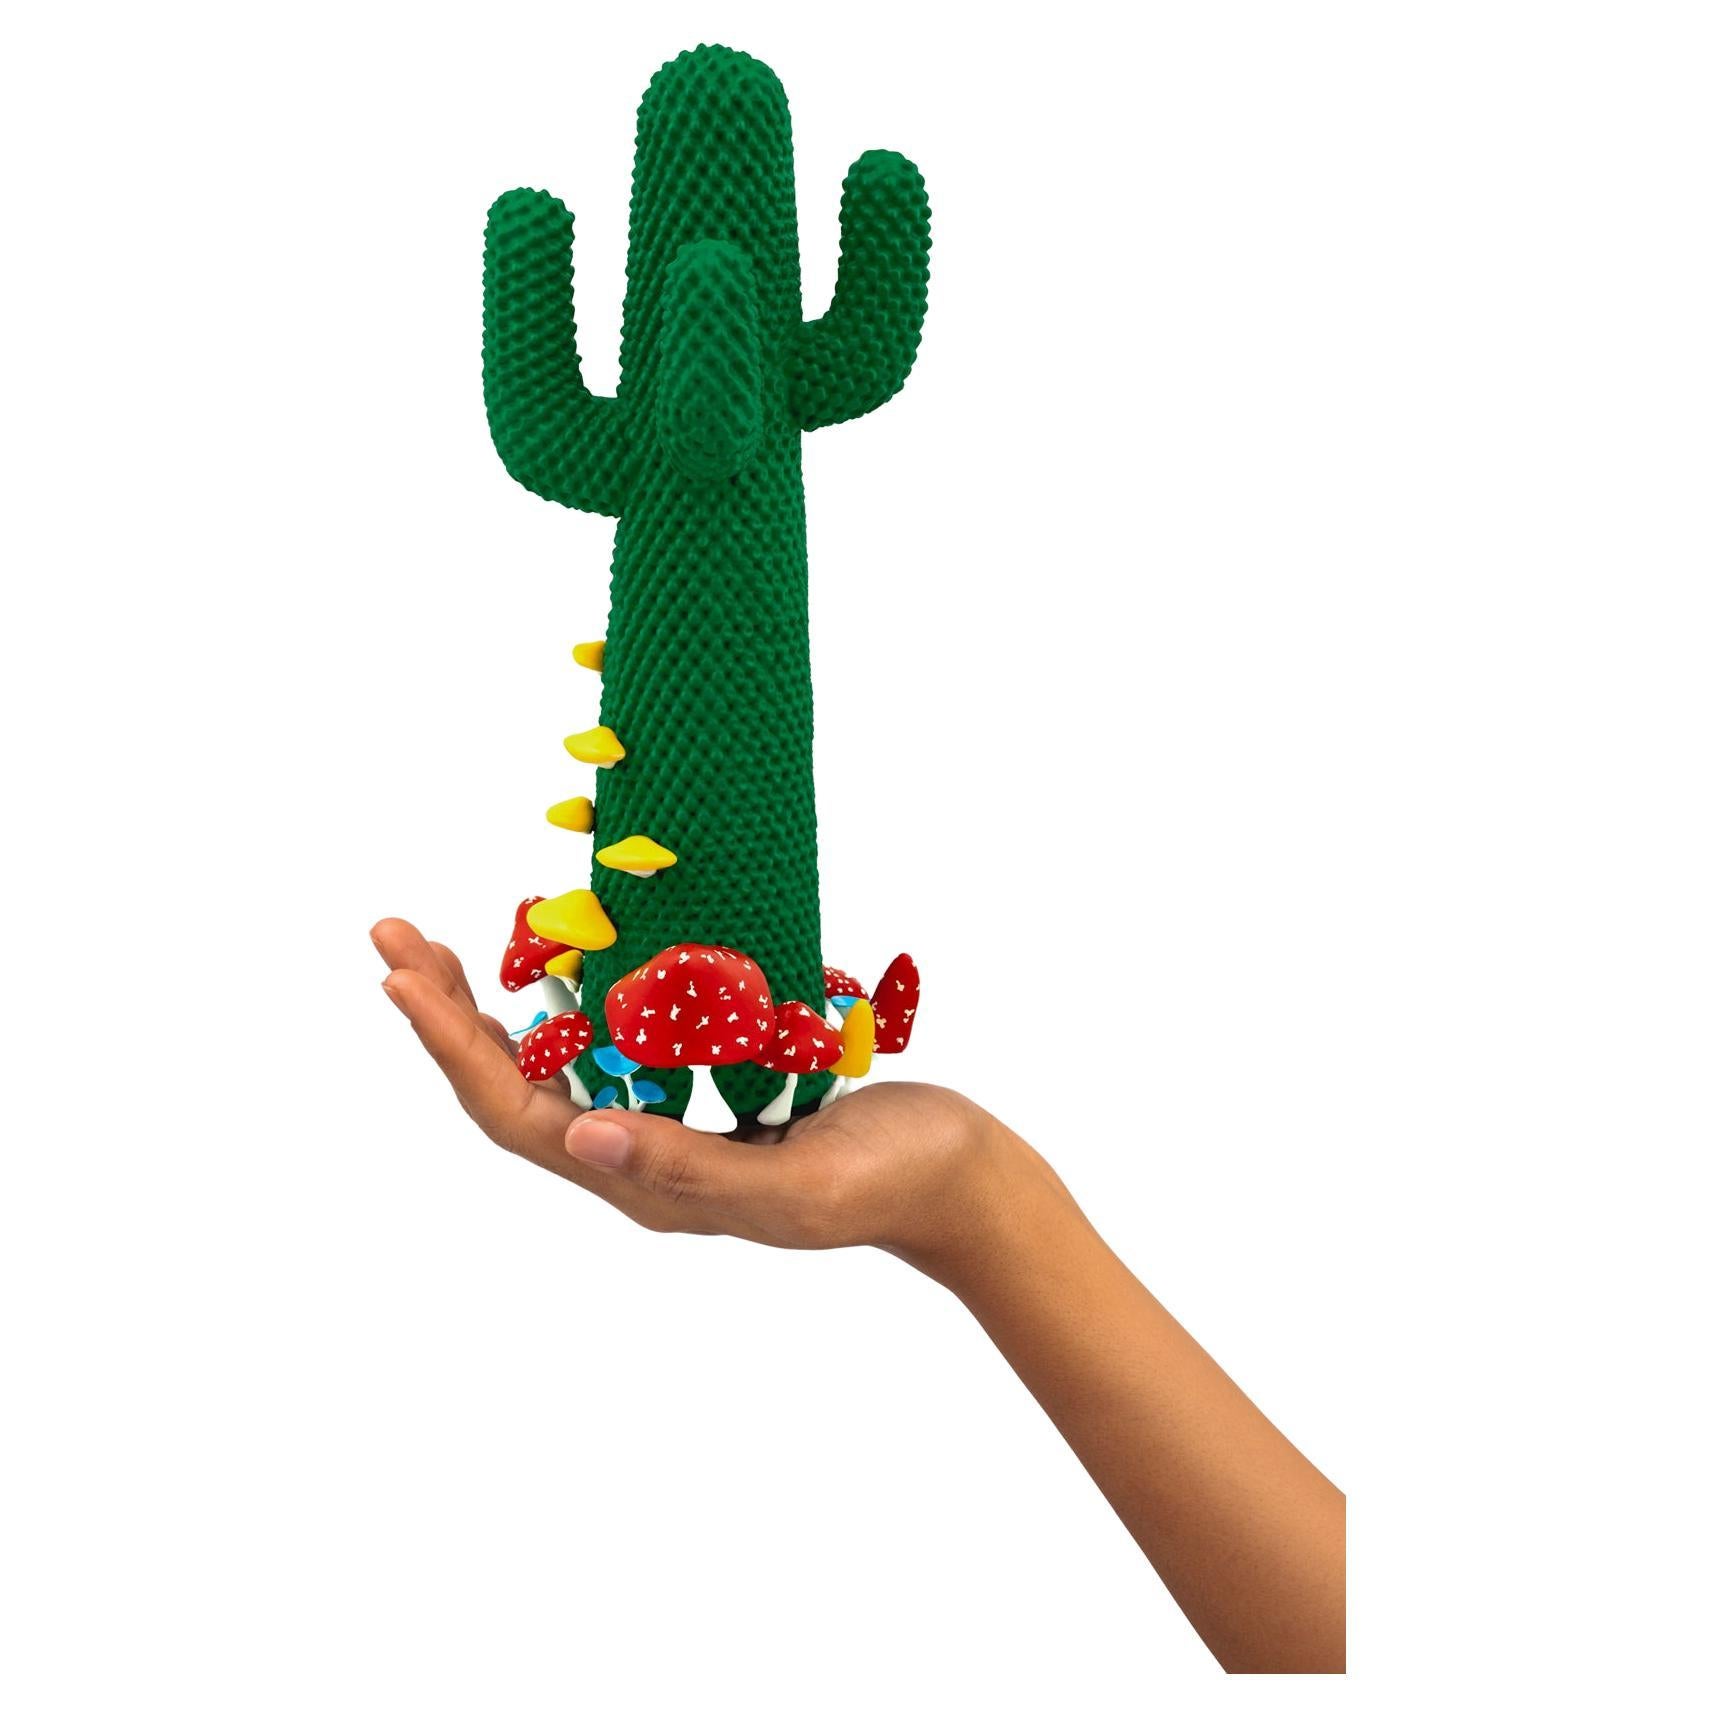 Limited Edition #31/99

Gufram presents the miniaturised version of the Shroom CACTUS® created in collaboration with A$AP Rocky and the artist’s new design studio HOMMEMADE Exactly as the real-size Shroom CACTUS®, the new Guframini piece features